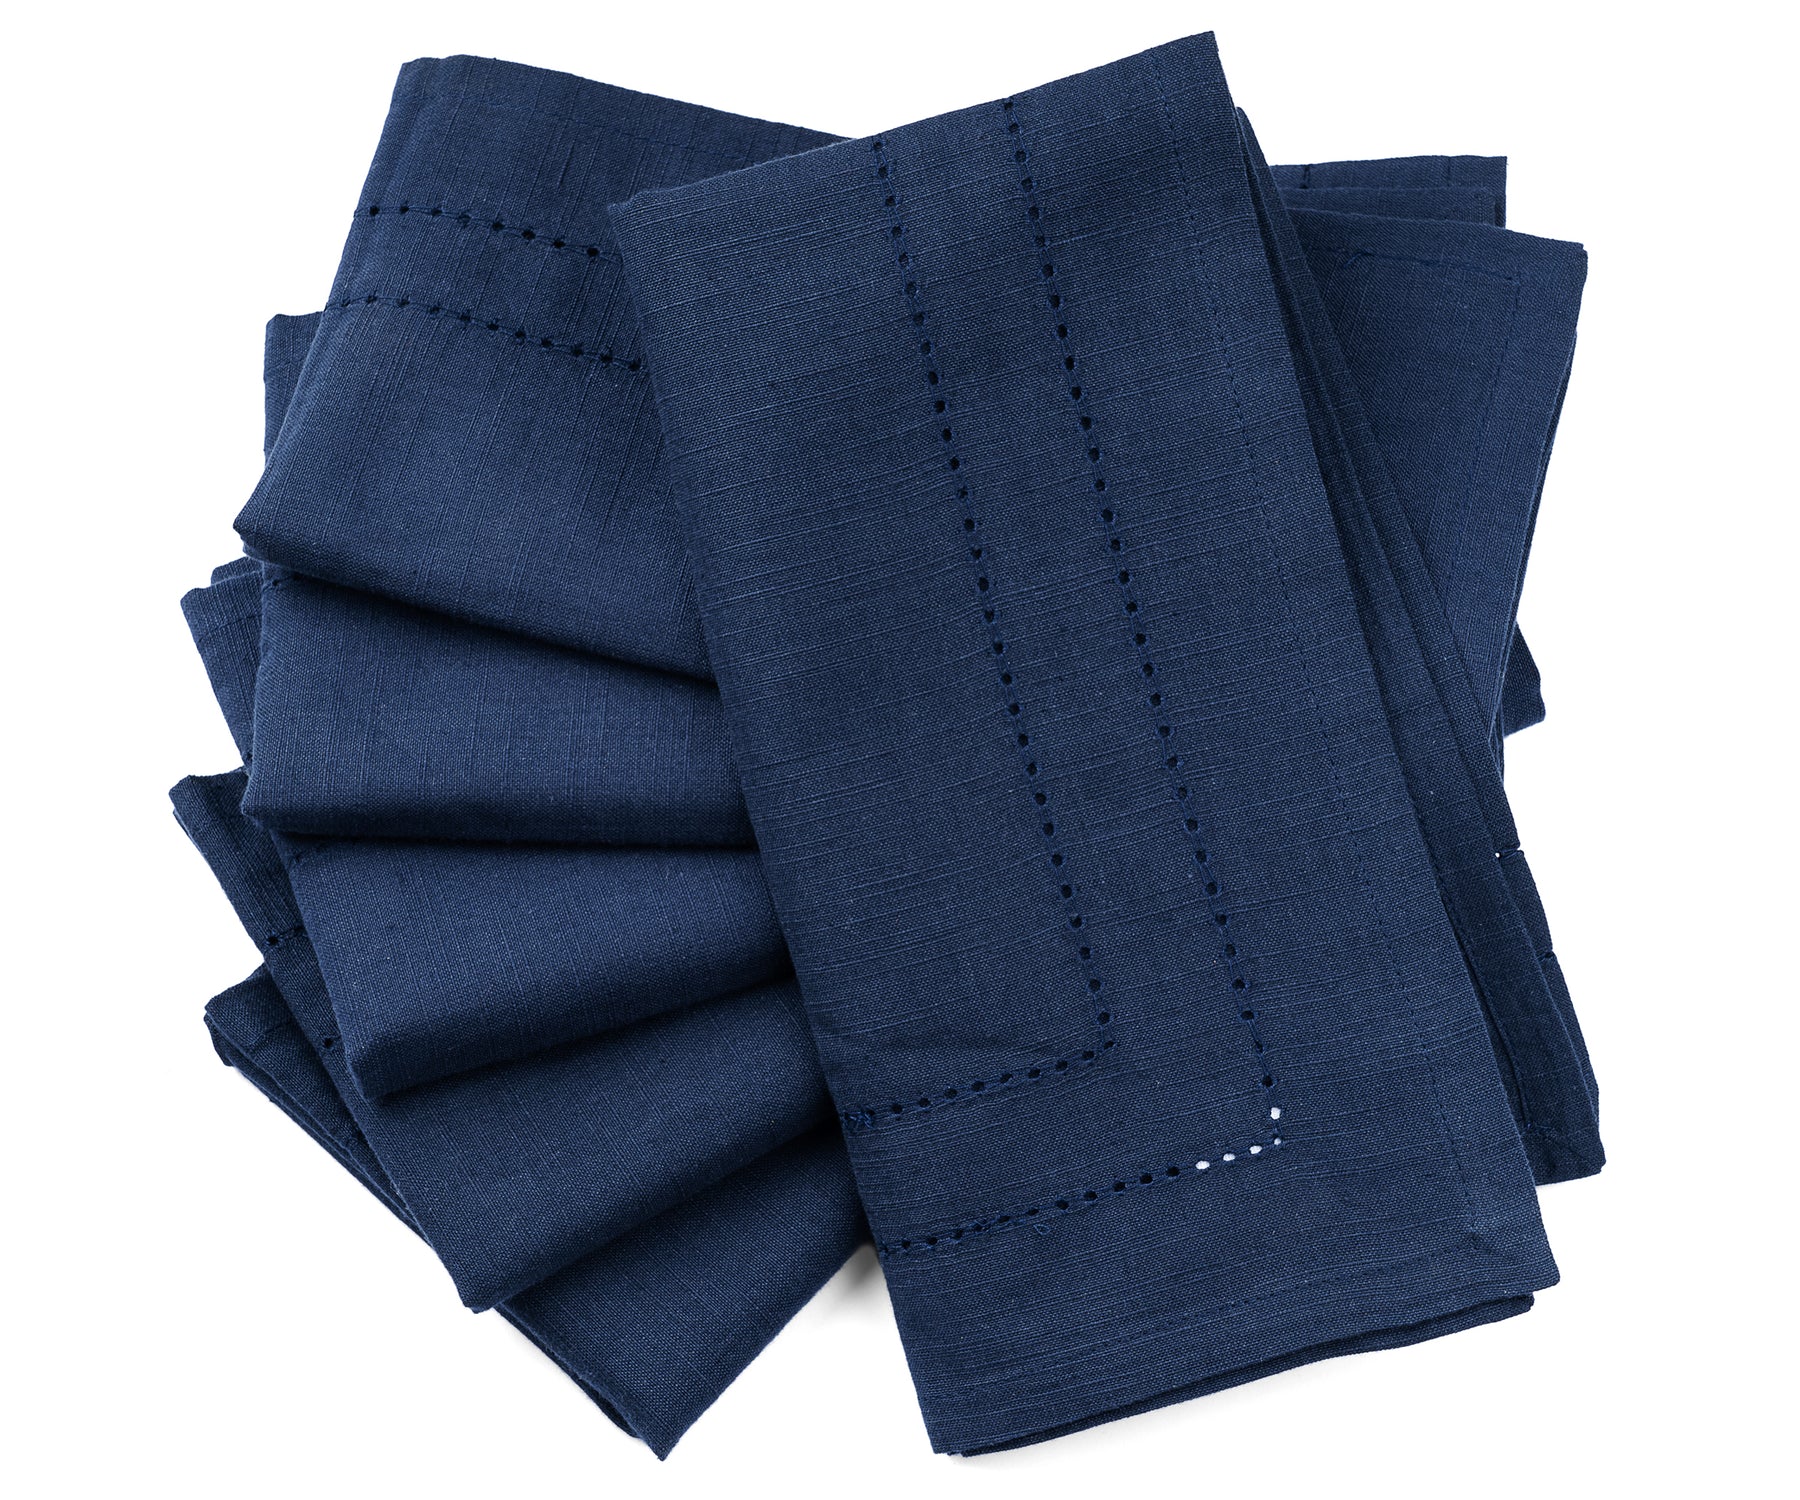 Luxurious navy blue Cloth Dinner Napkins with intricate white stitching, displayed elegantly